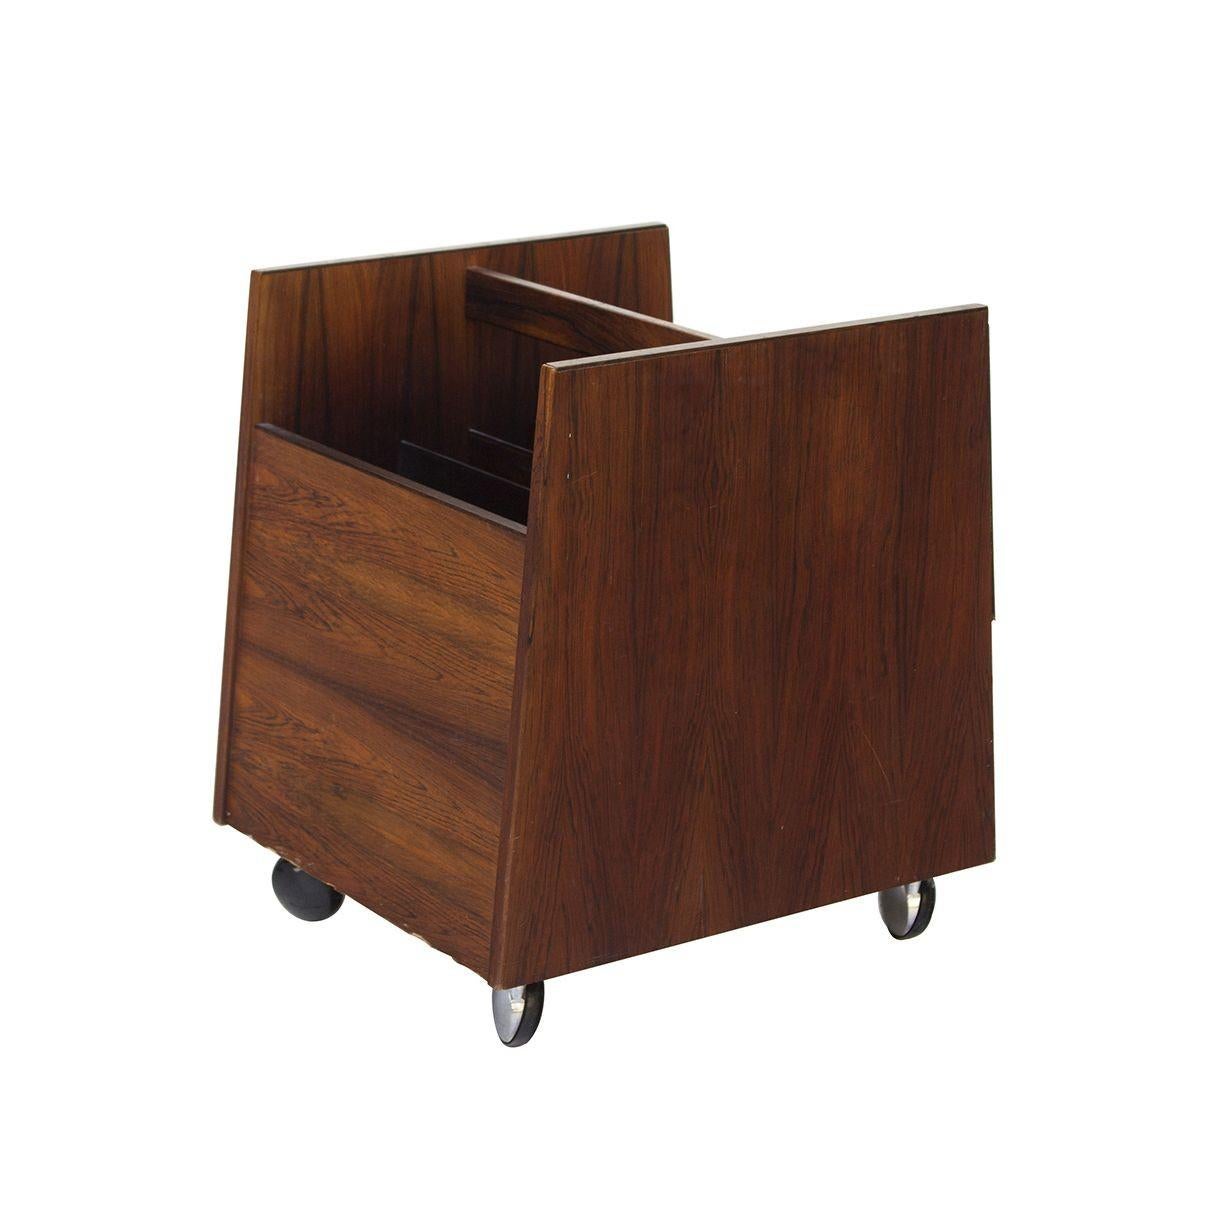 Rolling Lp Record or Magazine Caddy in Rosewood by Bruksbo In Fair Condition For Sale In Grand Rapids, MI